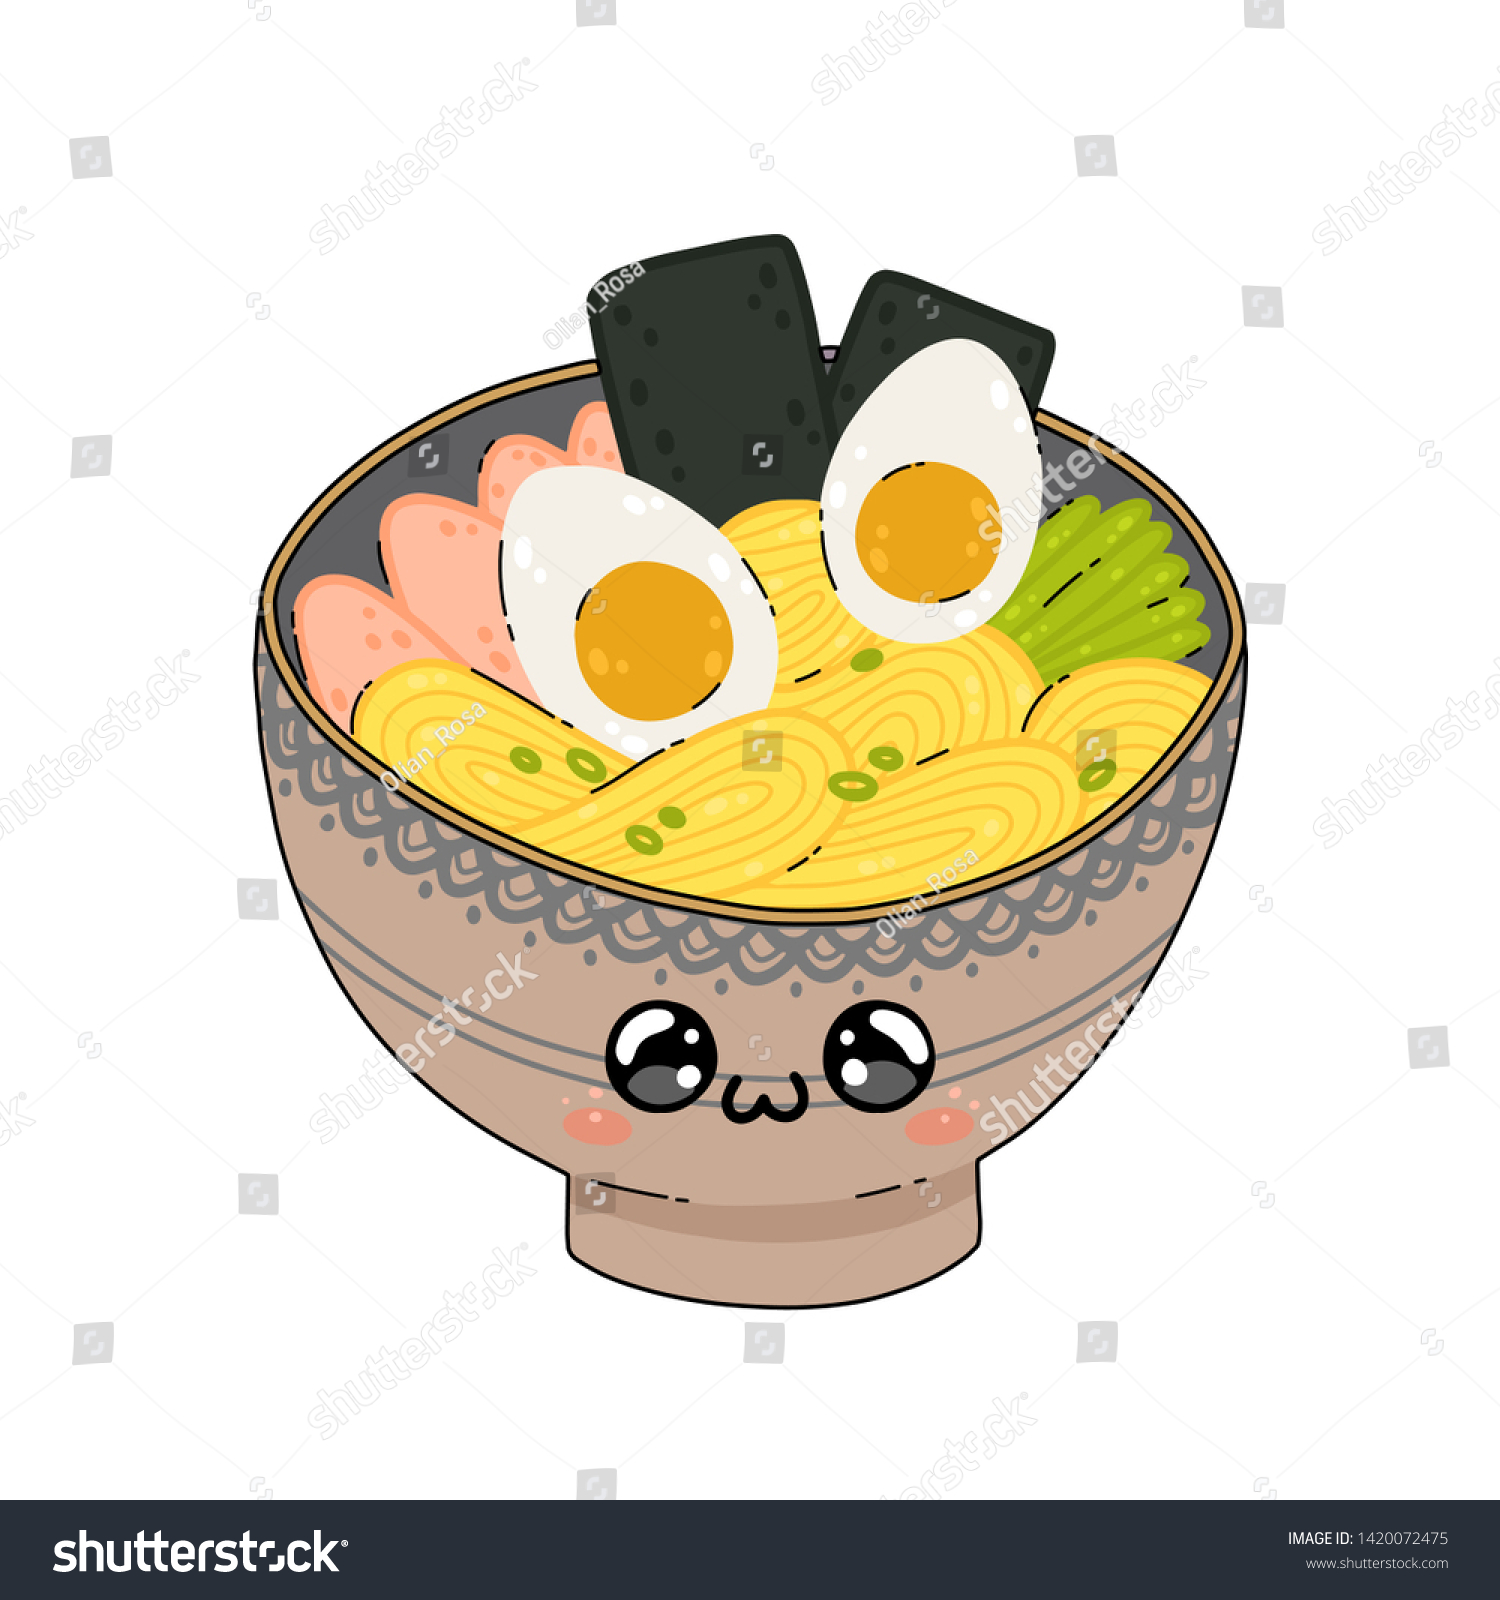 Japanese Bowl Noodle Soup Kawaii Waifu Anime Ramen Makes Me Feel Cook Dishes Foodie Cuisine Throw Pillow Multicolor 18x18 